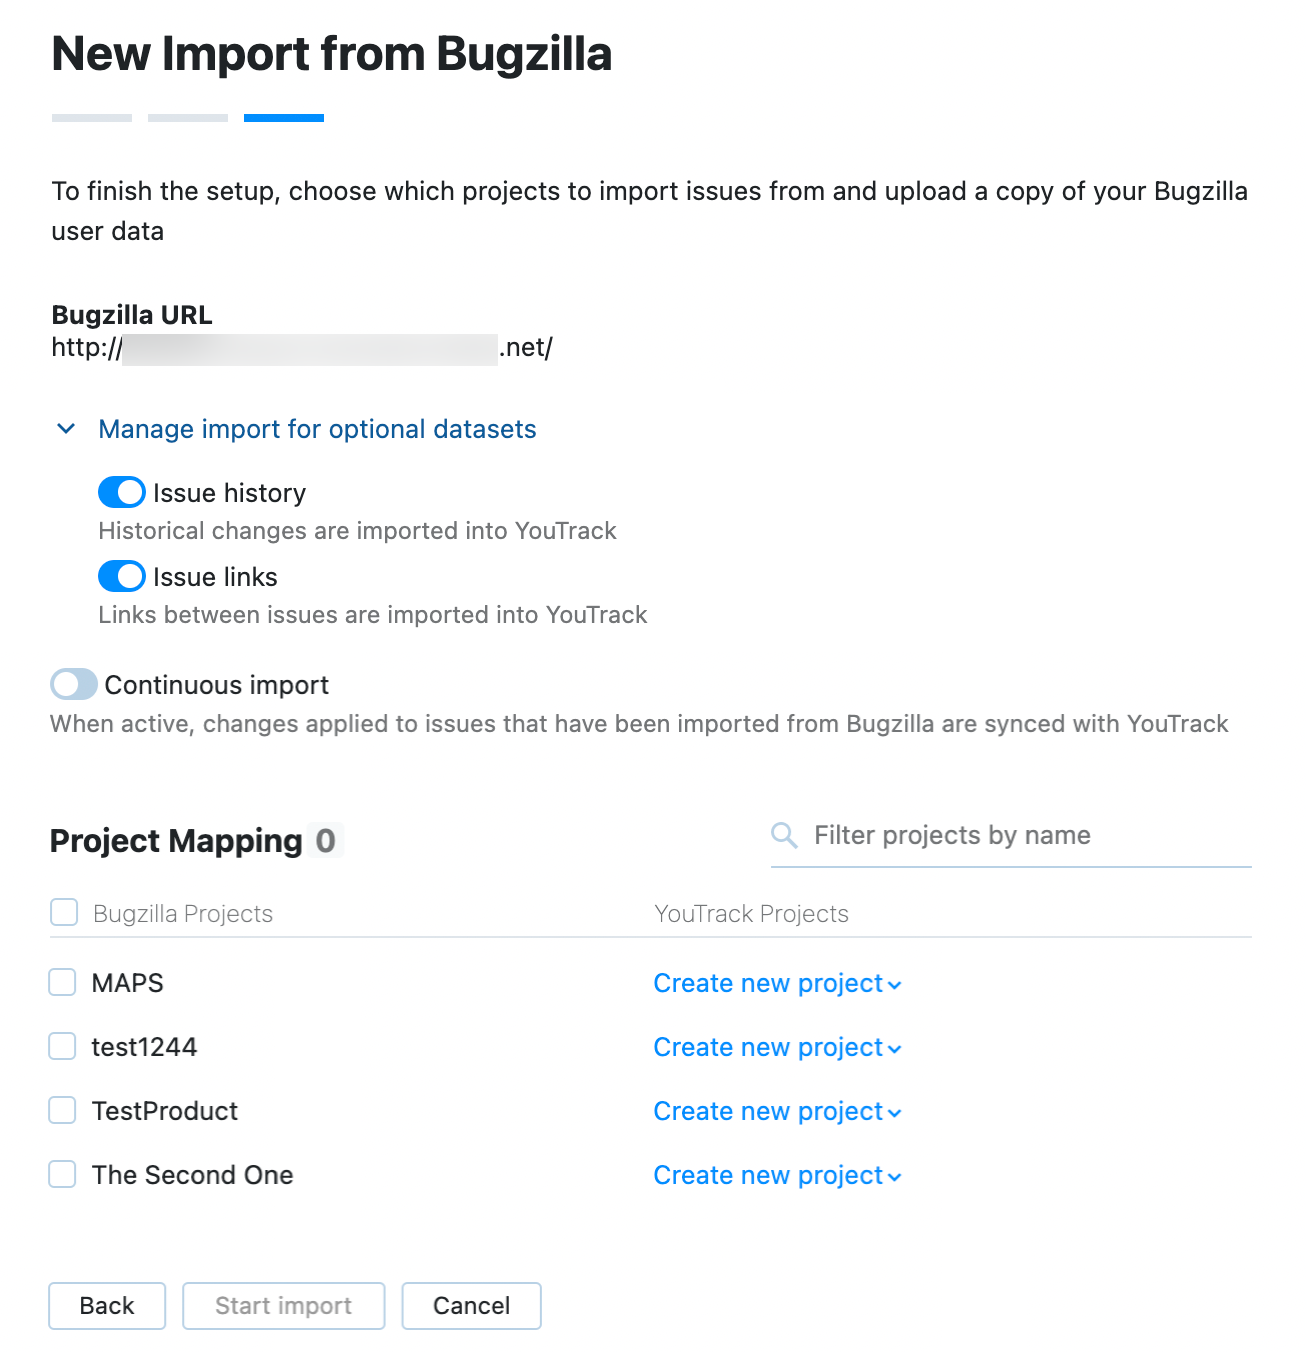 Select projects to import